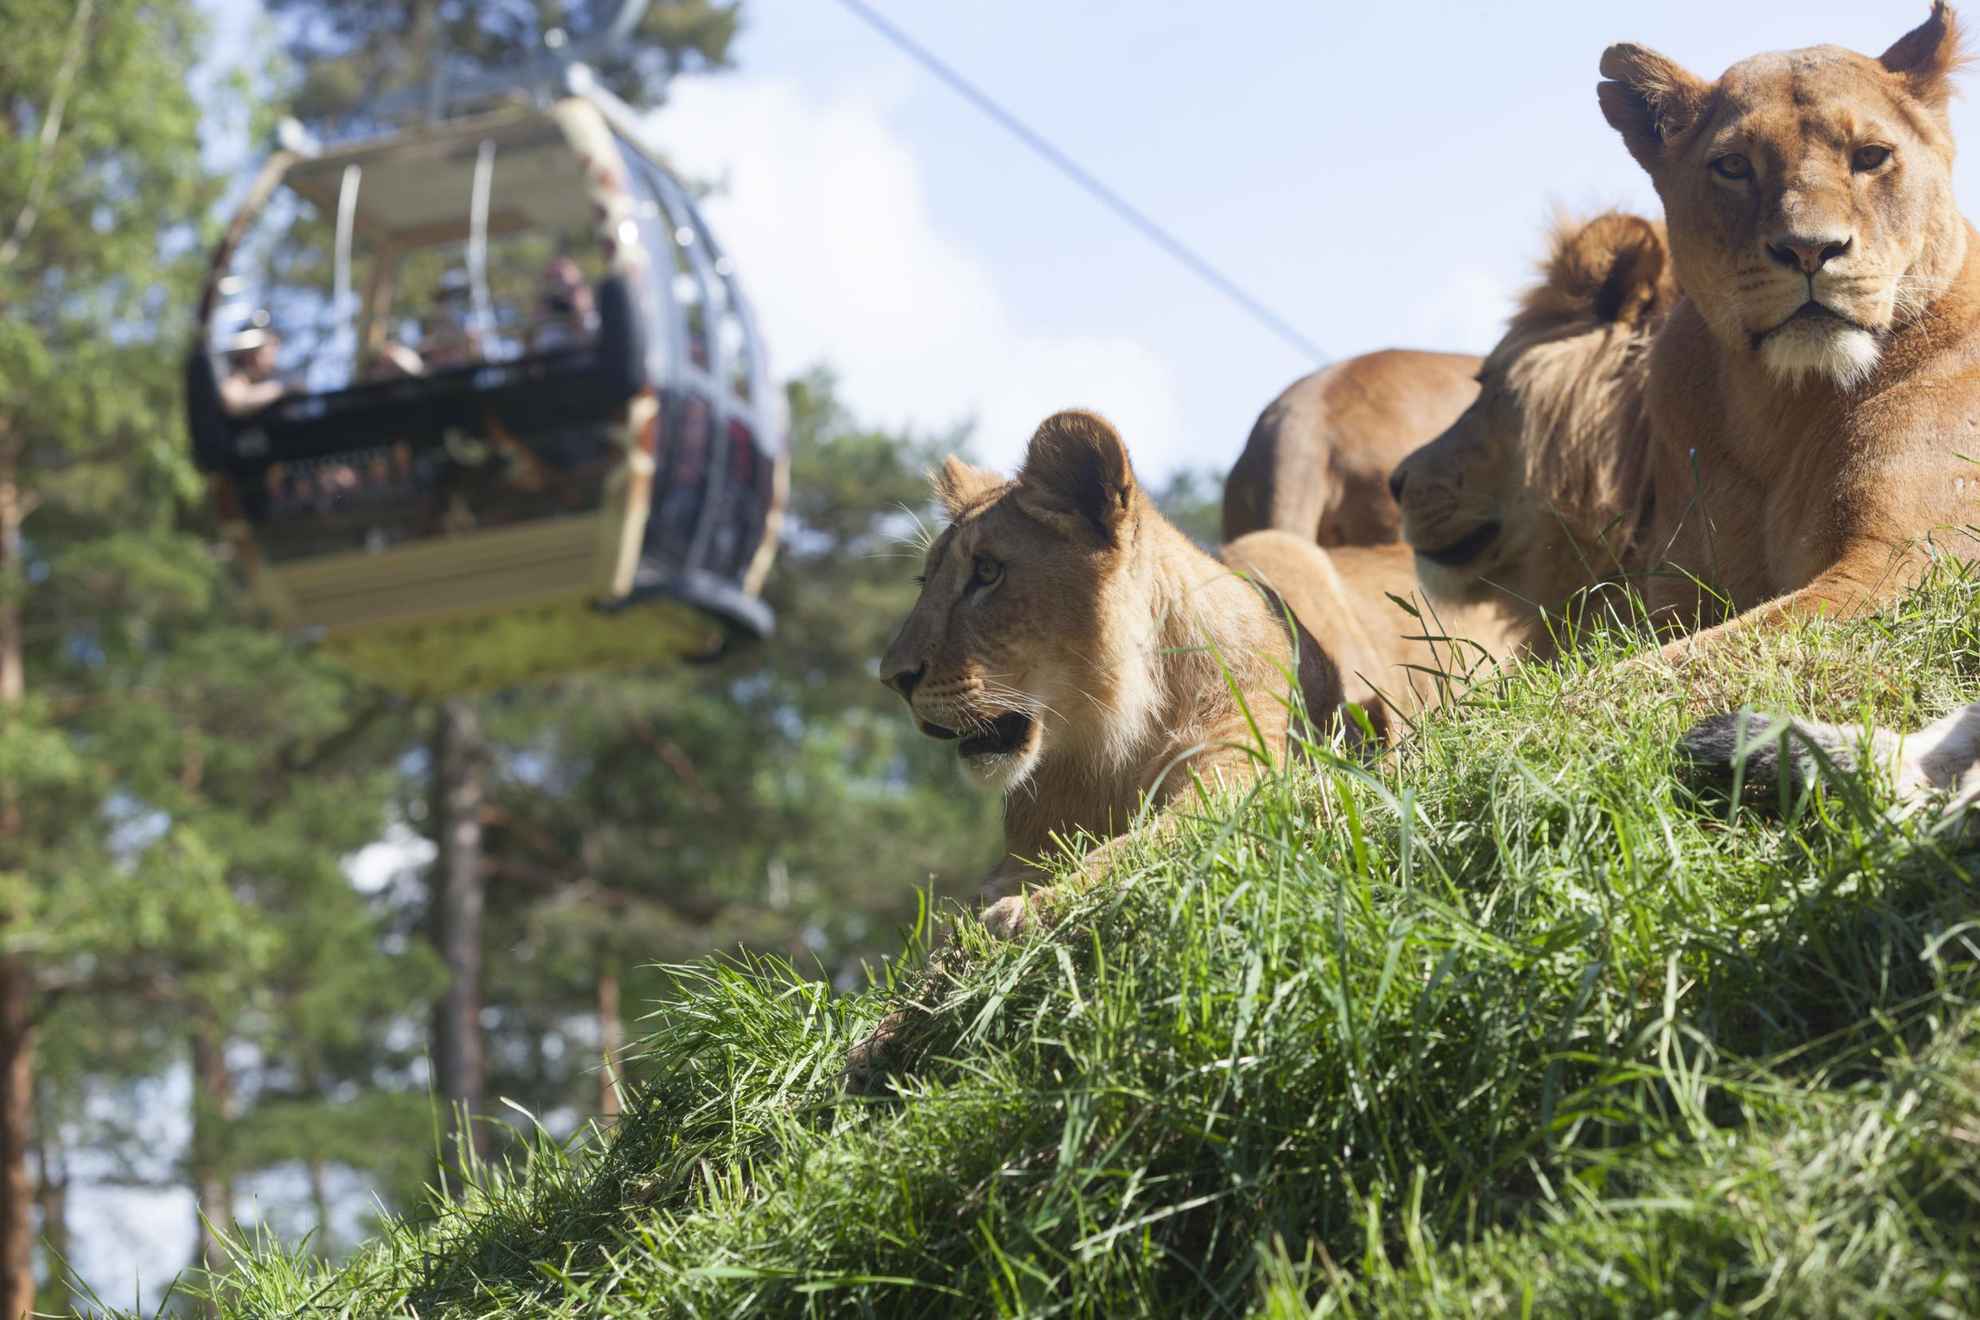 Three lions resting in the grass while a cable car passes by.